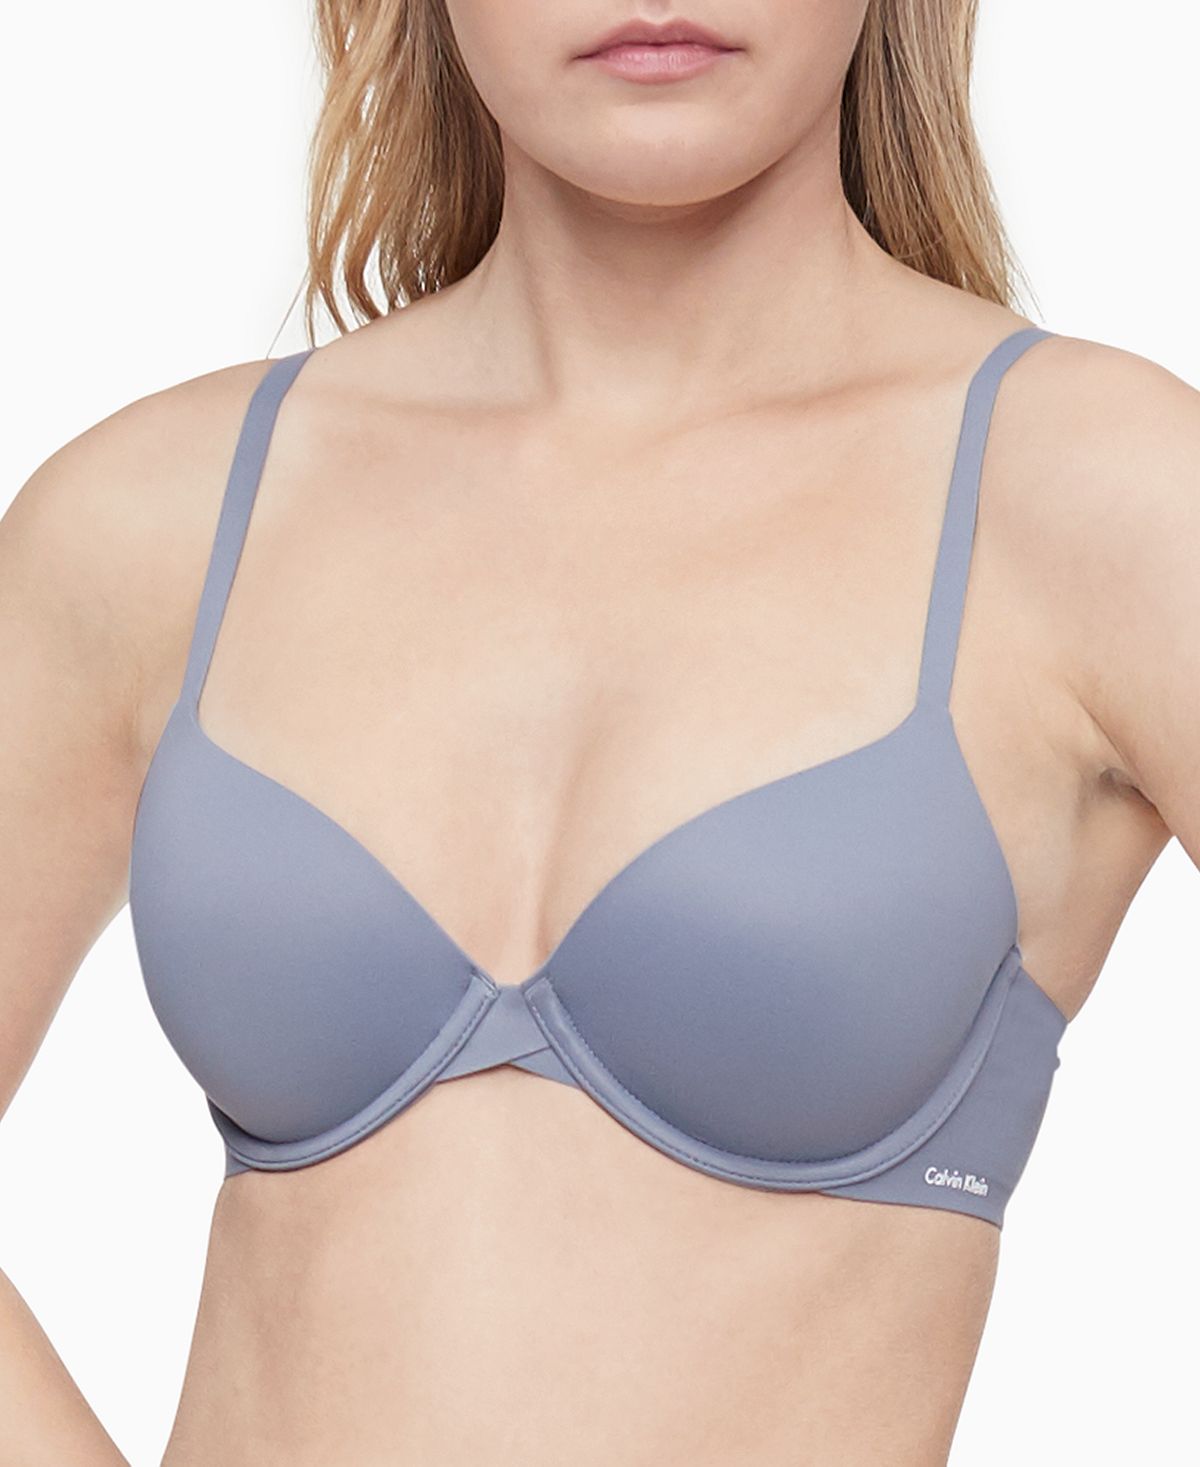  Calvin Klein Womens Perfectly Fit Lightly Lined T-Shirt Bra